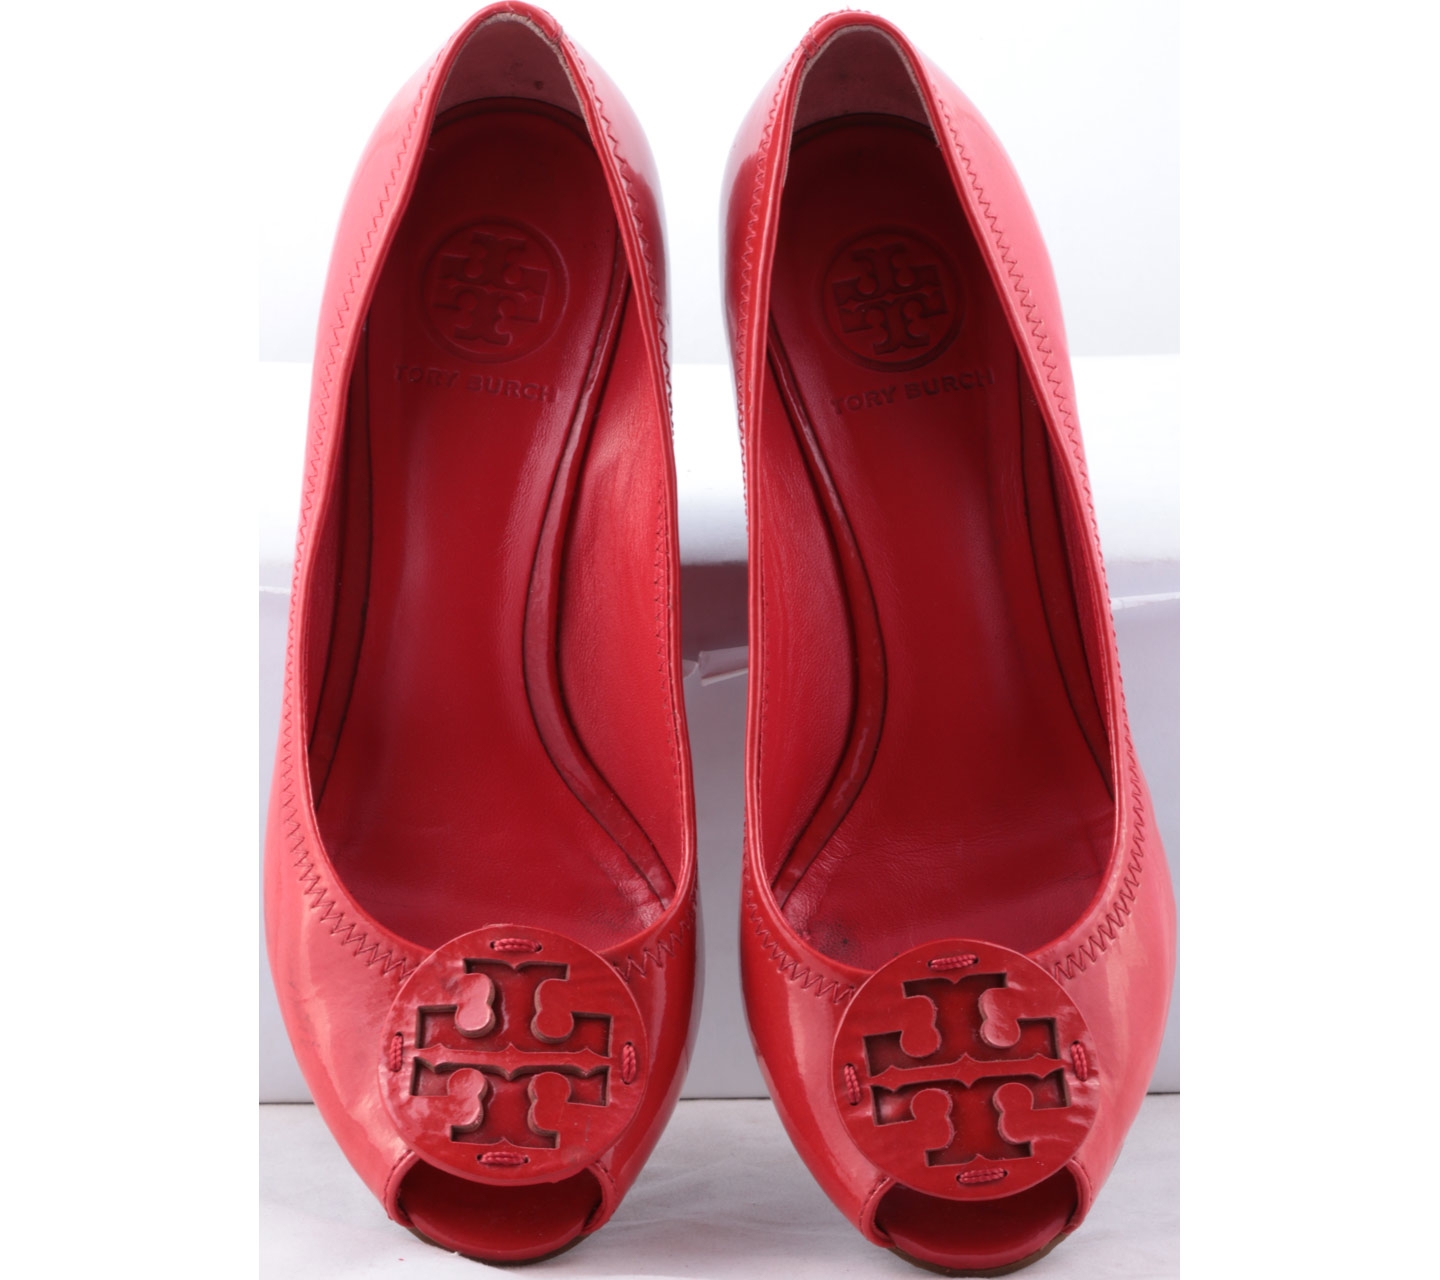 Tory Burch Red And Brown Wedges